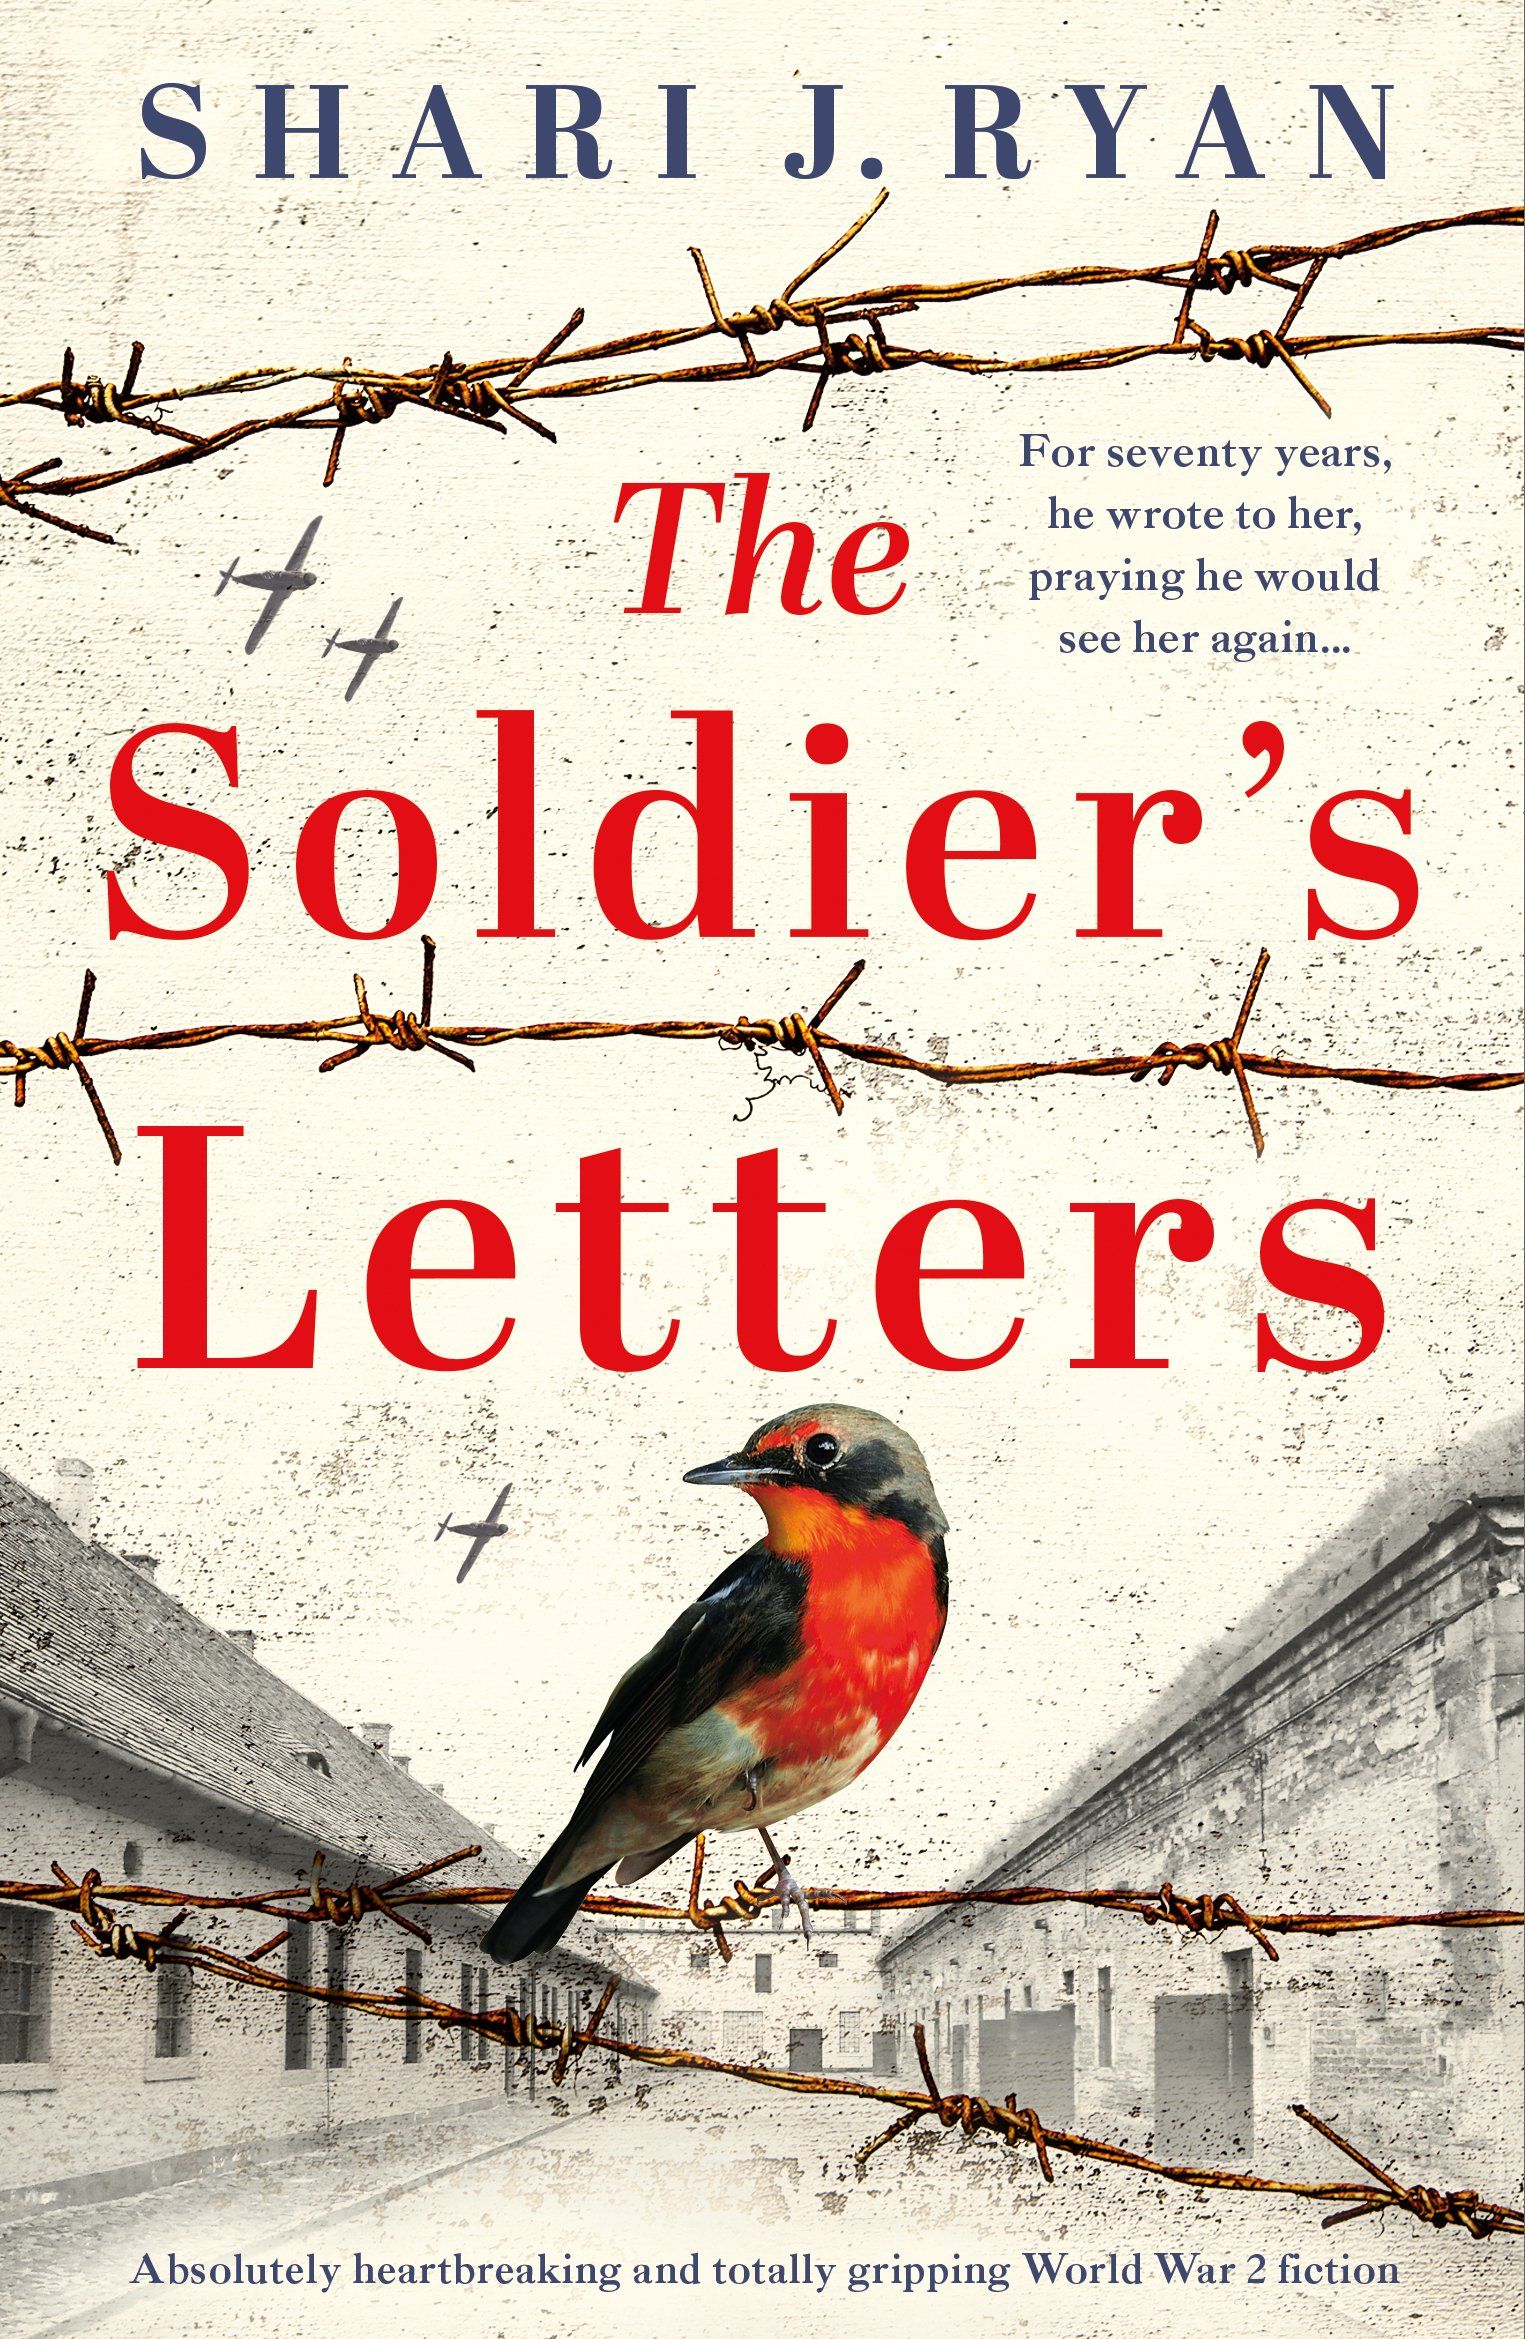 The Soldier's Letters by Shari J. Ryan